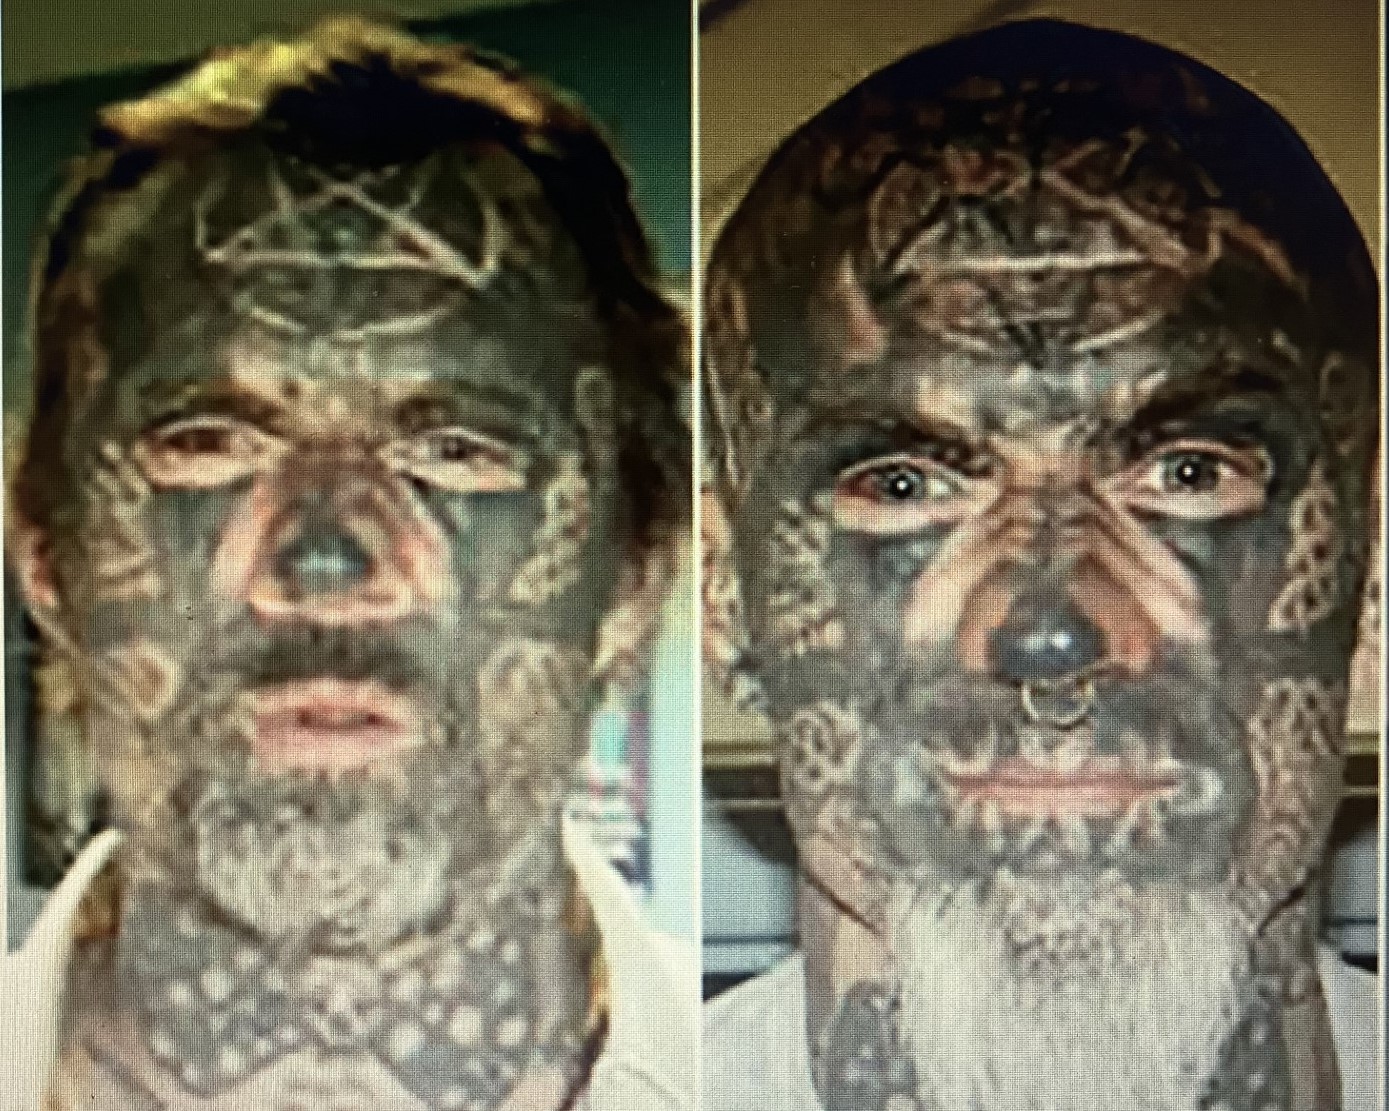 Notorious Criminal With Tattooed Face Arrested Over Machete and Ax Attacks